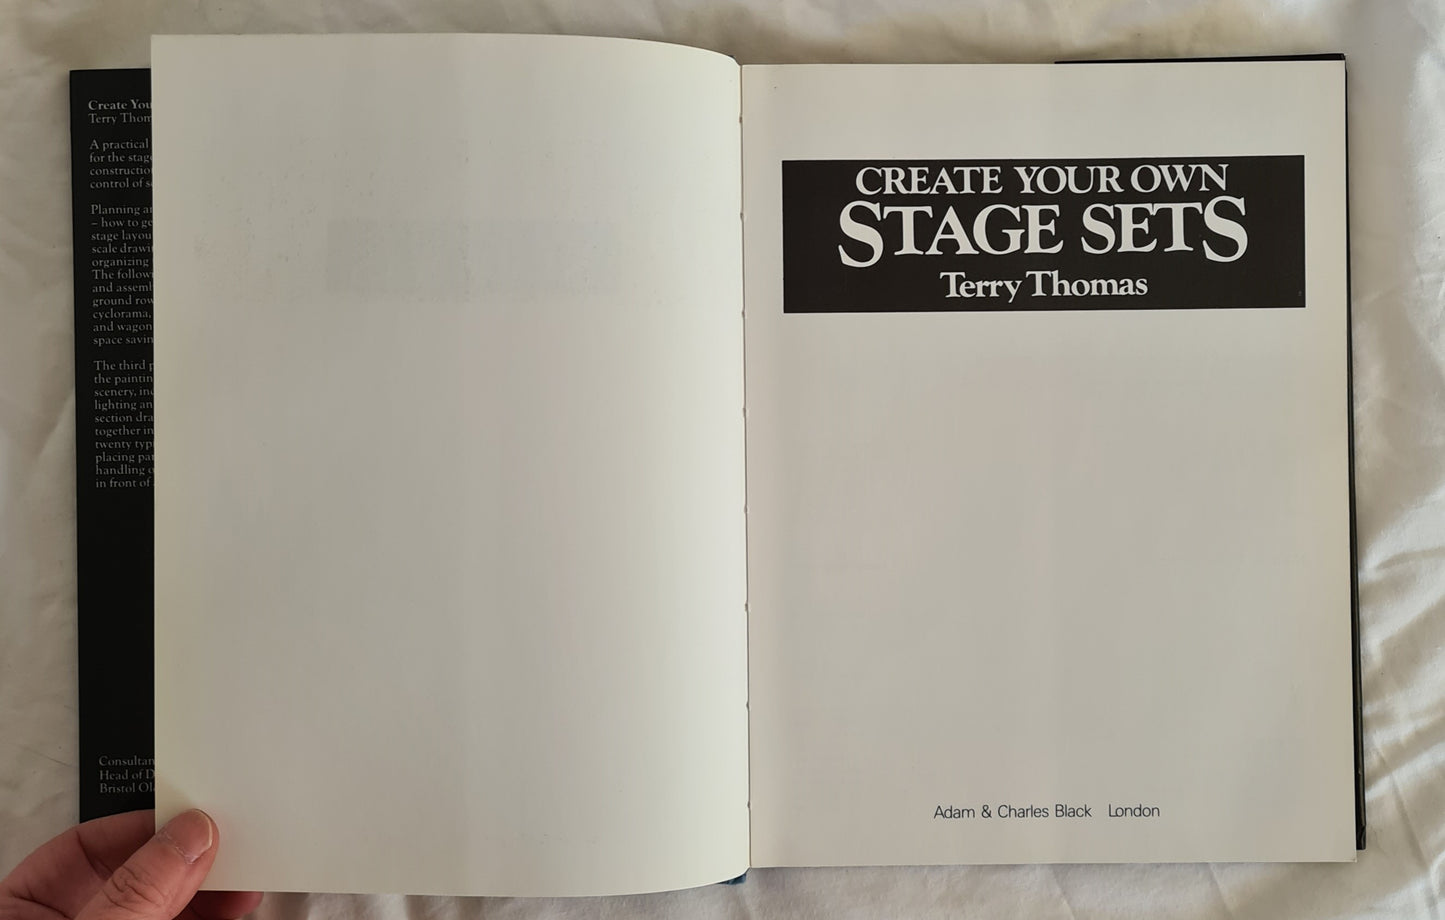 Create Your Own Stage Sets by Terry Thomas